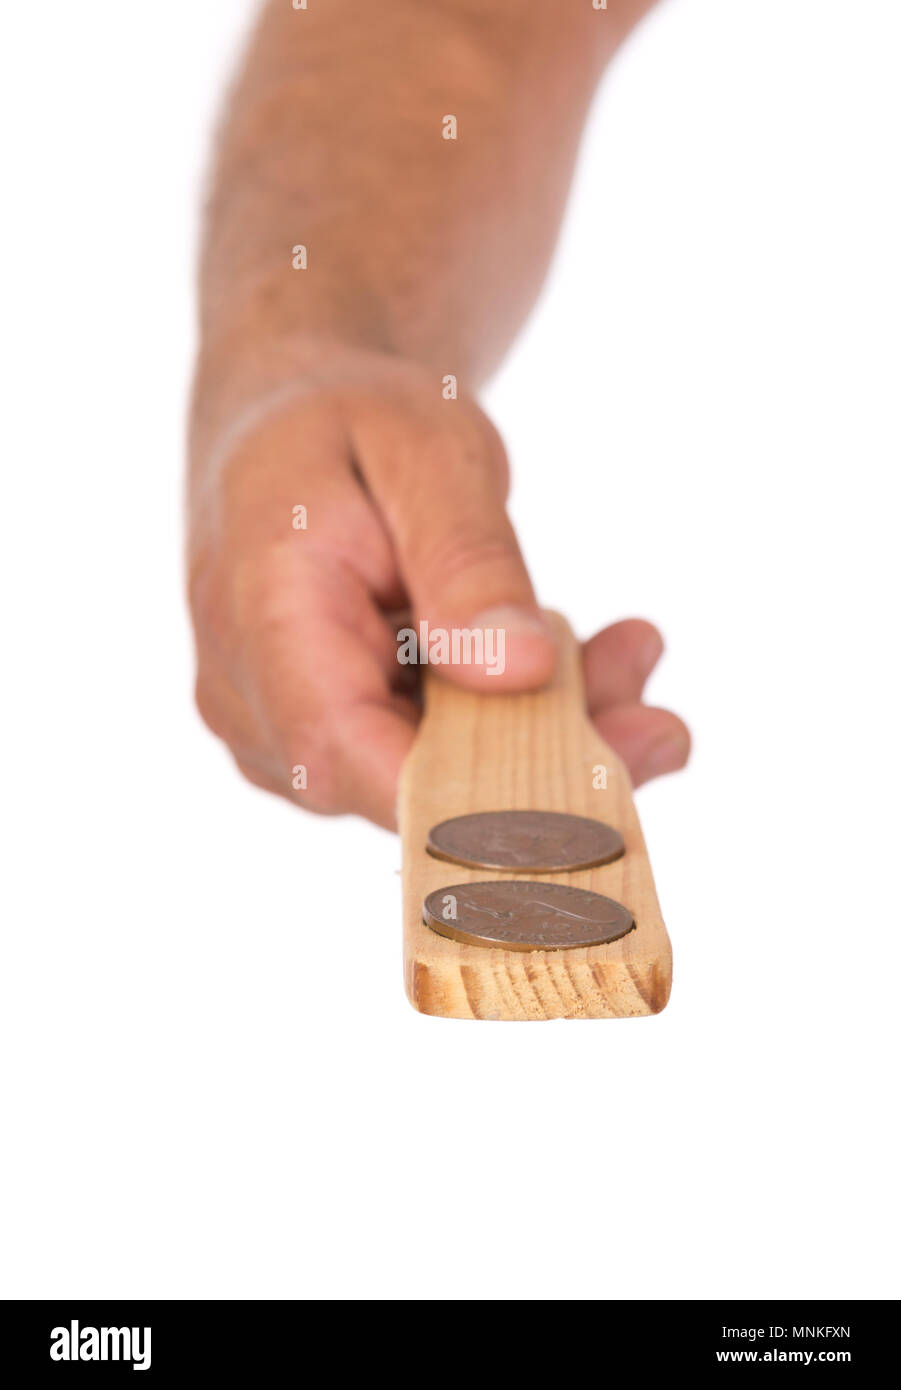 A hand tossing Pennies for a Two Up game, Australian Culture. Stock Photo